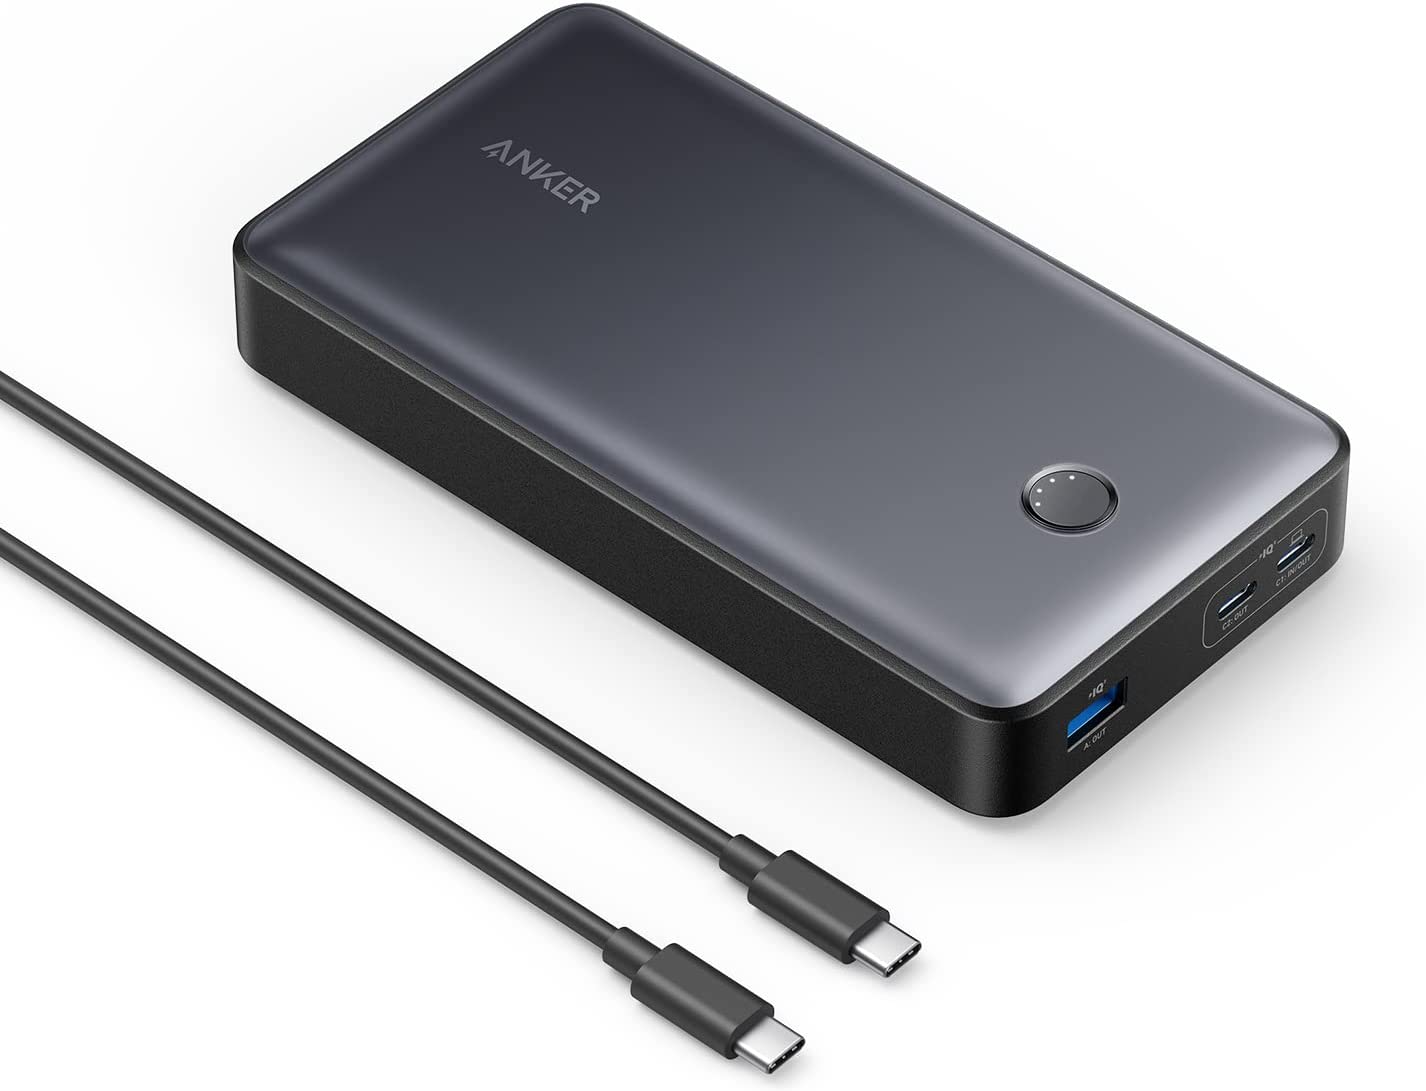 Deal Alert! Ankers Massive 65W USB-C Power Bank is On Sale!